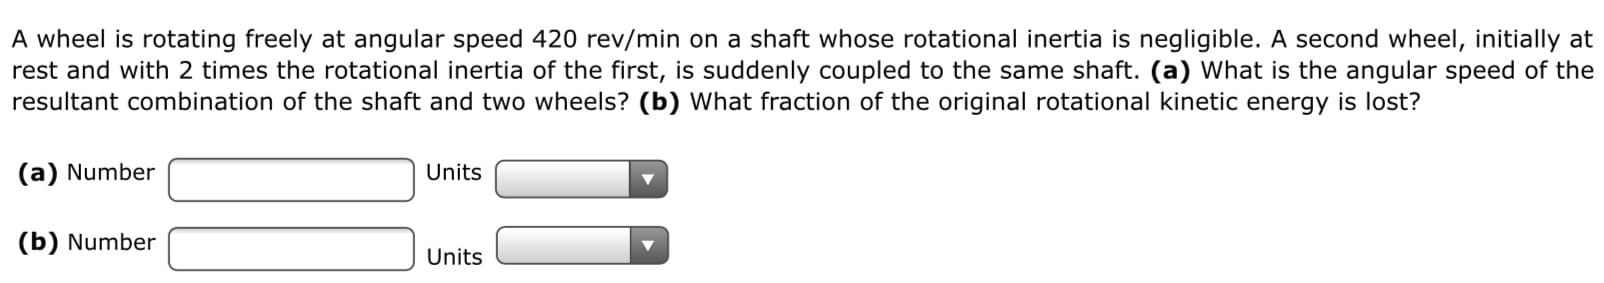 A wheel is rotating freely at angular speed 420 rev/min on a shaft whose rotational inertia is negligible. A second wheel, initially at
rest and with 2 times the rotational inertia of the first, is suddenly coupled to the same shaft. (a) What is the angular speed of the
resultant combination of the shaft and two wheels? (b) What fraction of the original rotational kinetic energy is lost?
